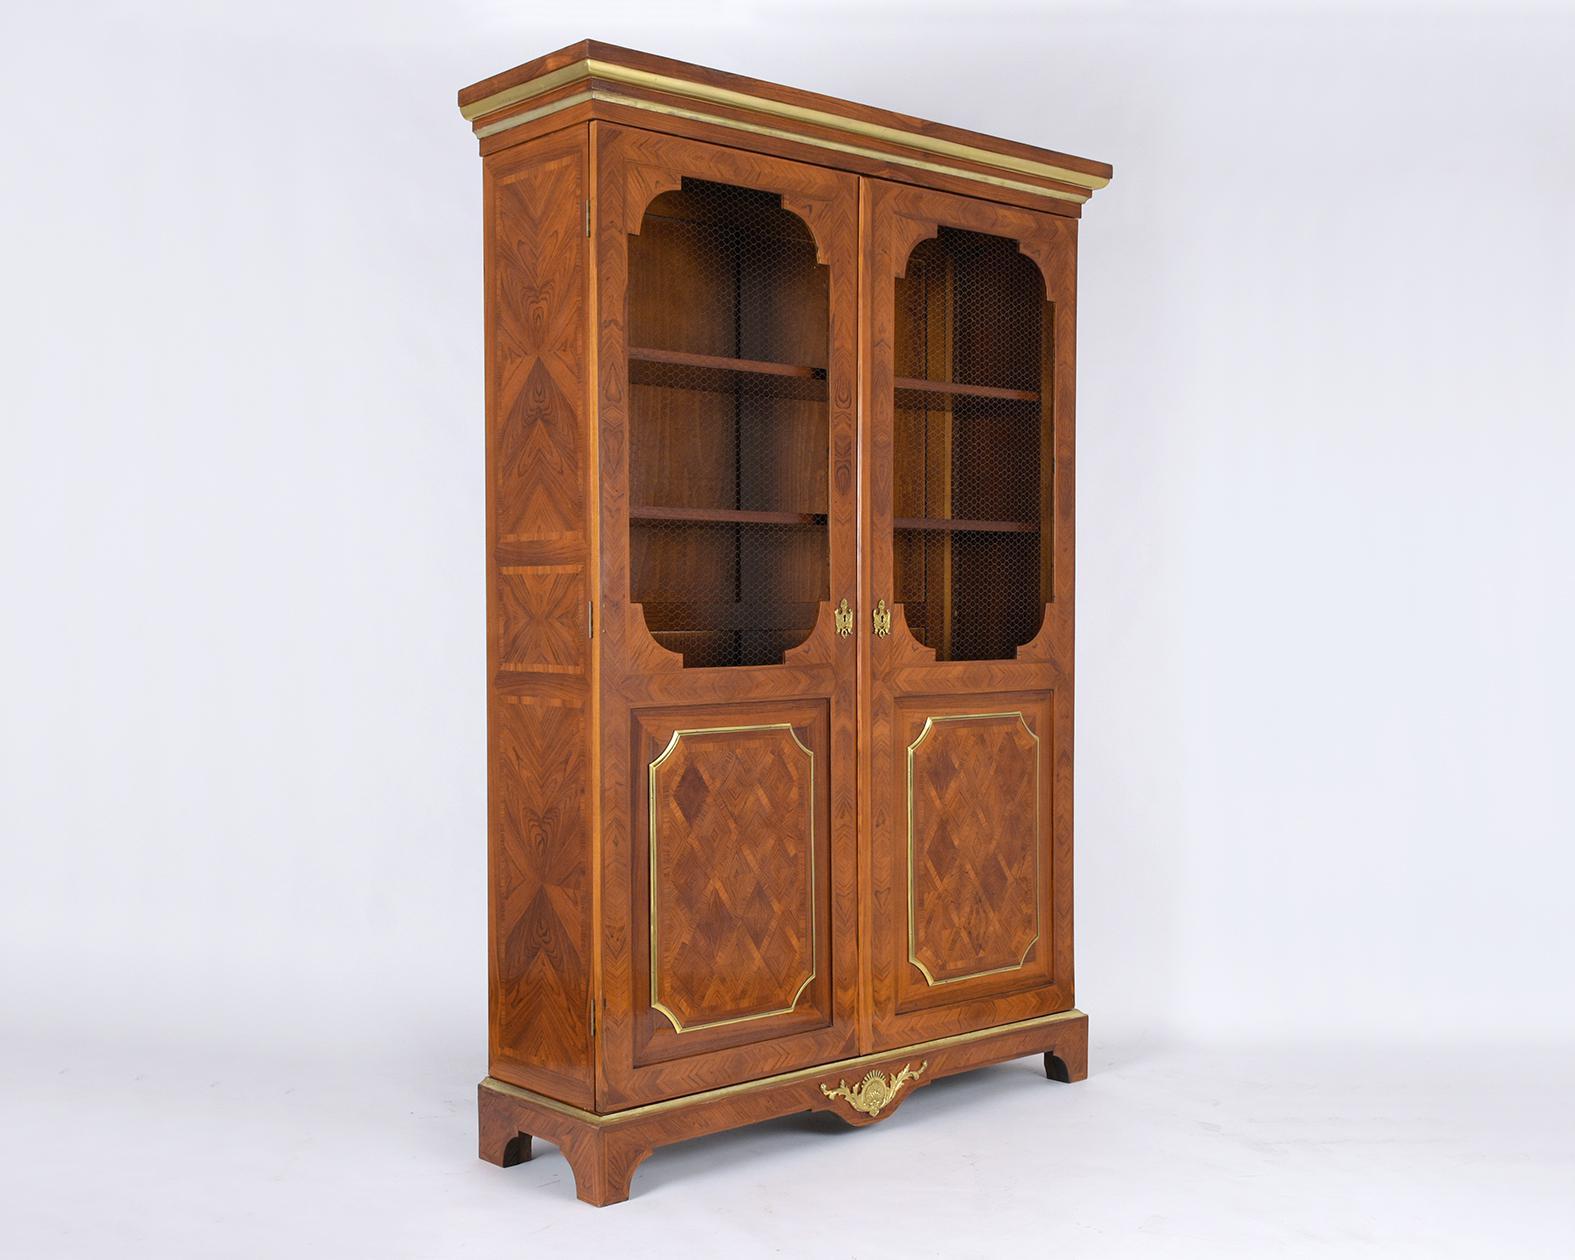 Step back into the grandeur of the 1900s with our exquisite antique French Louis XVI-style walnut bookcase, a true masterpiece showcasing the pinnacle of traditional craftsmanship. Handcrafted with care and precision, this vintage piece is